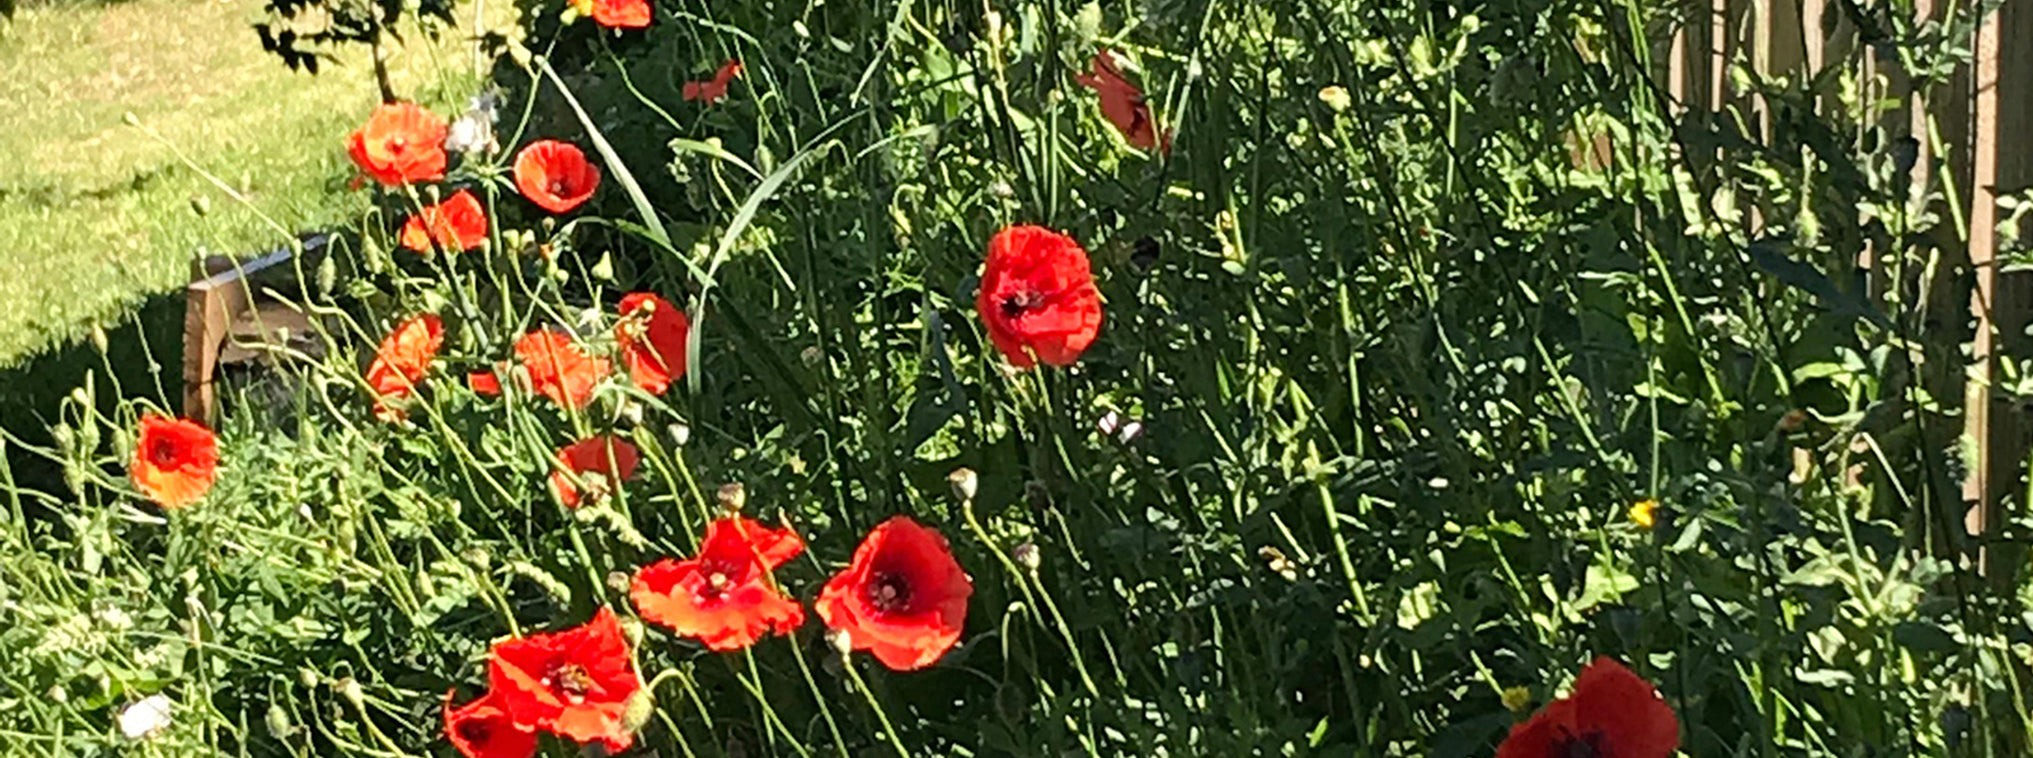 poppies garden tuscany florence